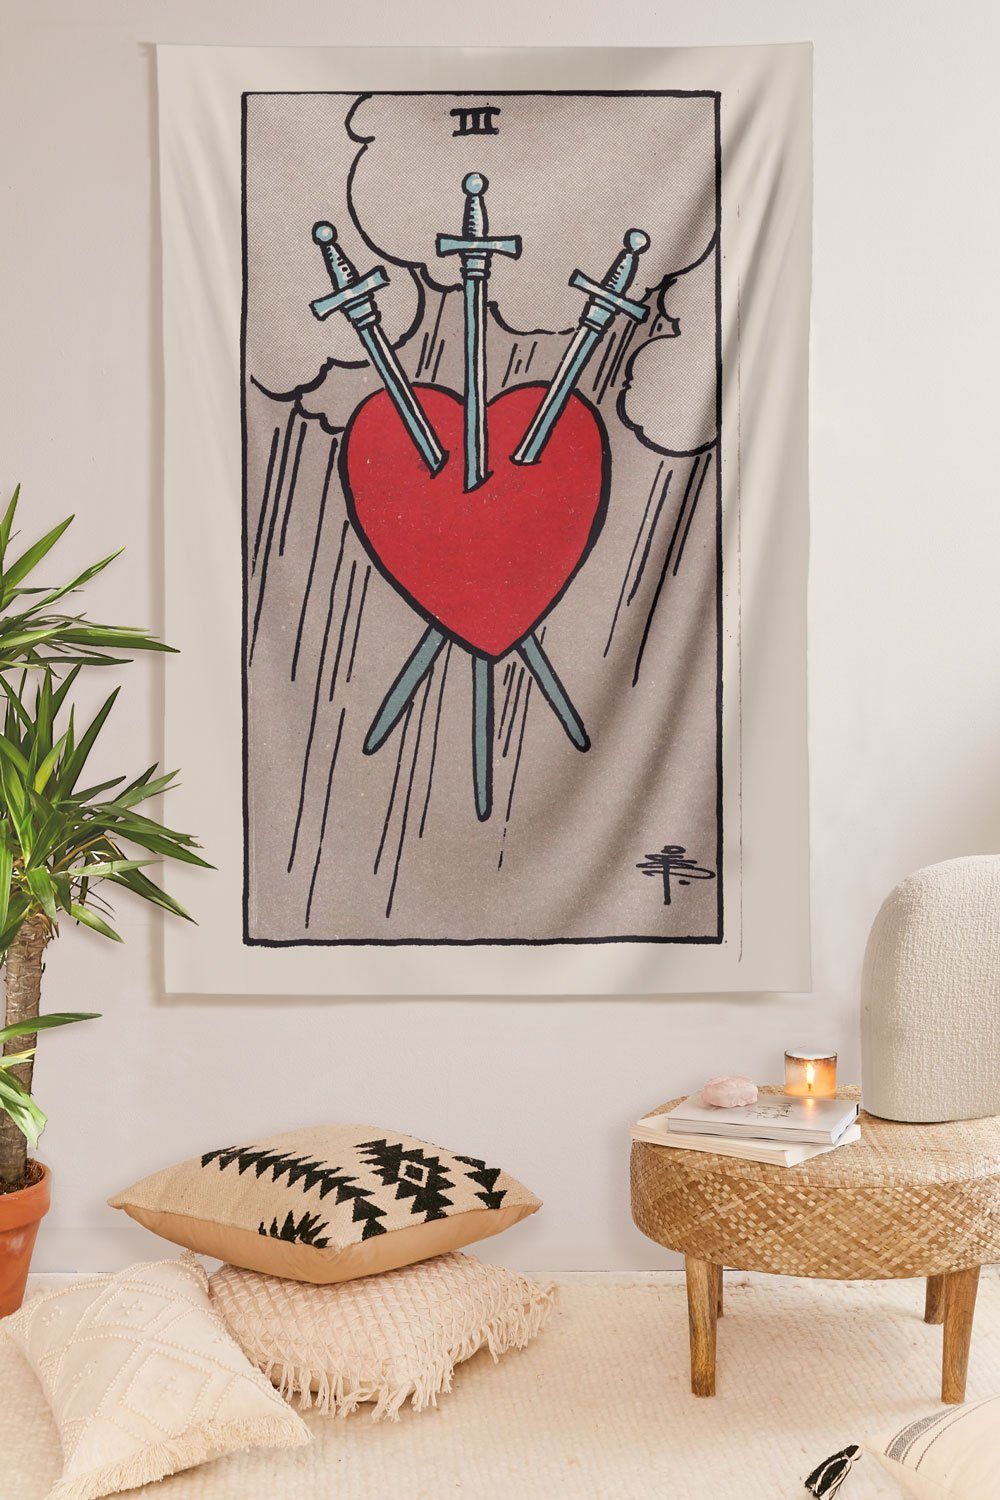 3 of Swords Tapestry tapestry NirvanaThreads 